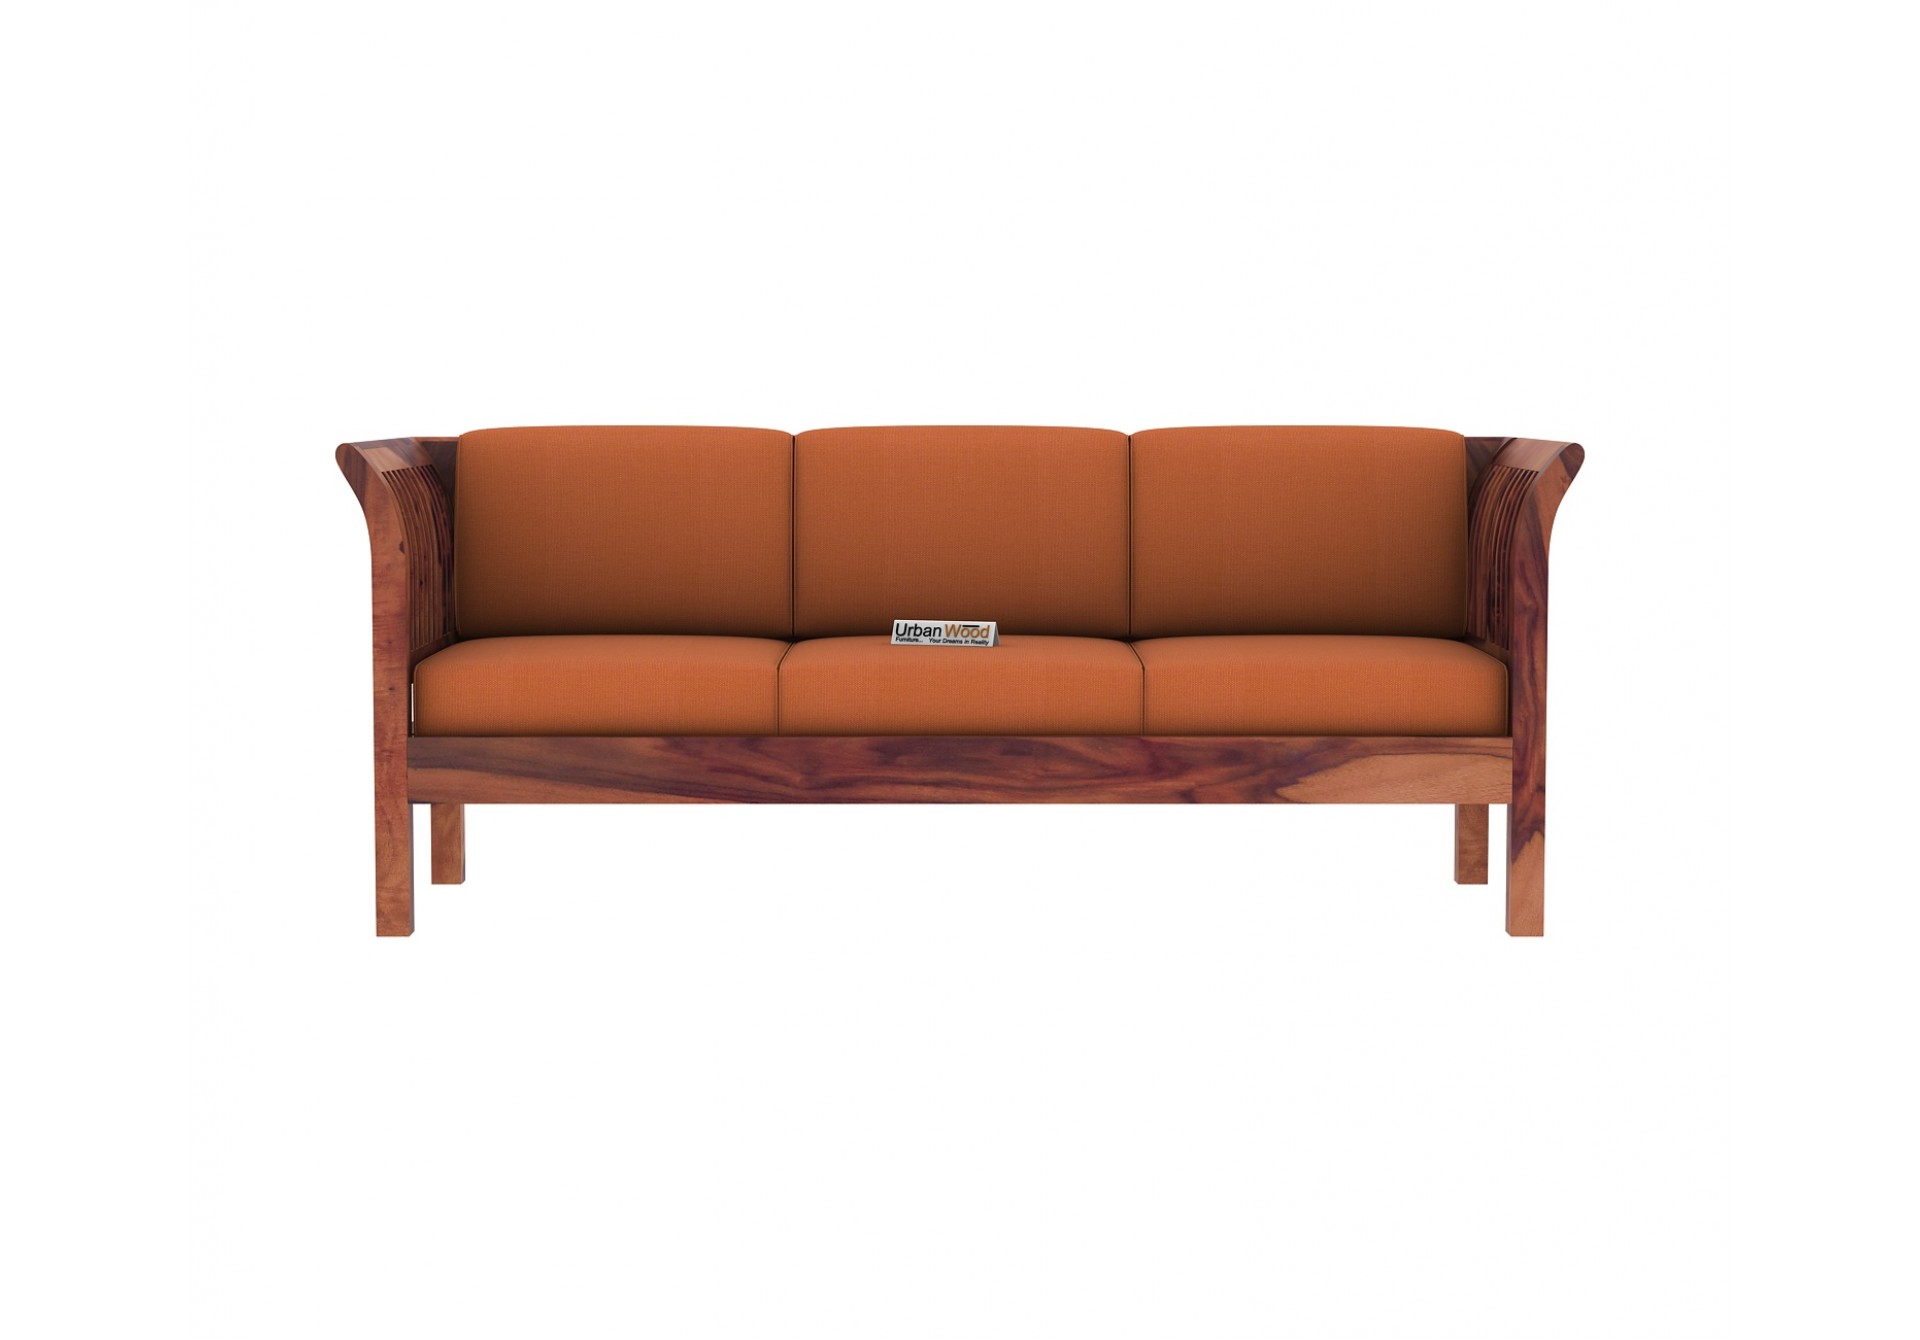 Crispin 3 Seater Wooden Sofa 